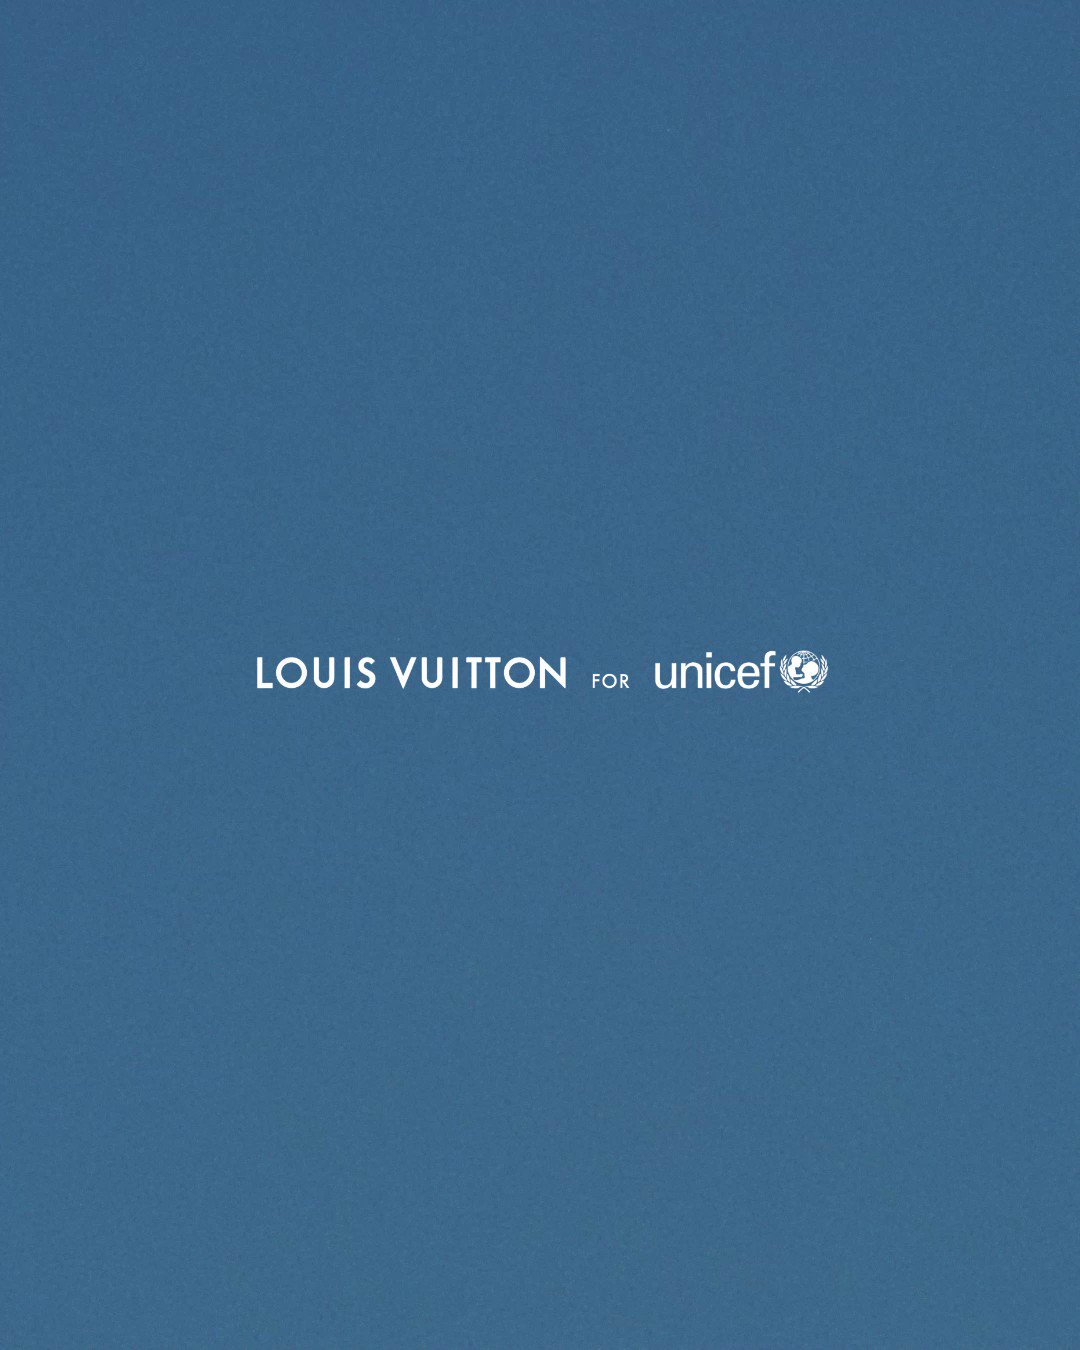 Louis Vuitton on X: #MAKEAPROMISE to @UNICEF with House